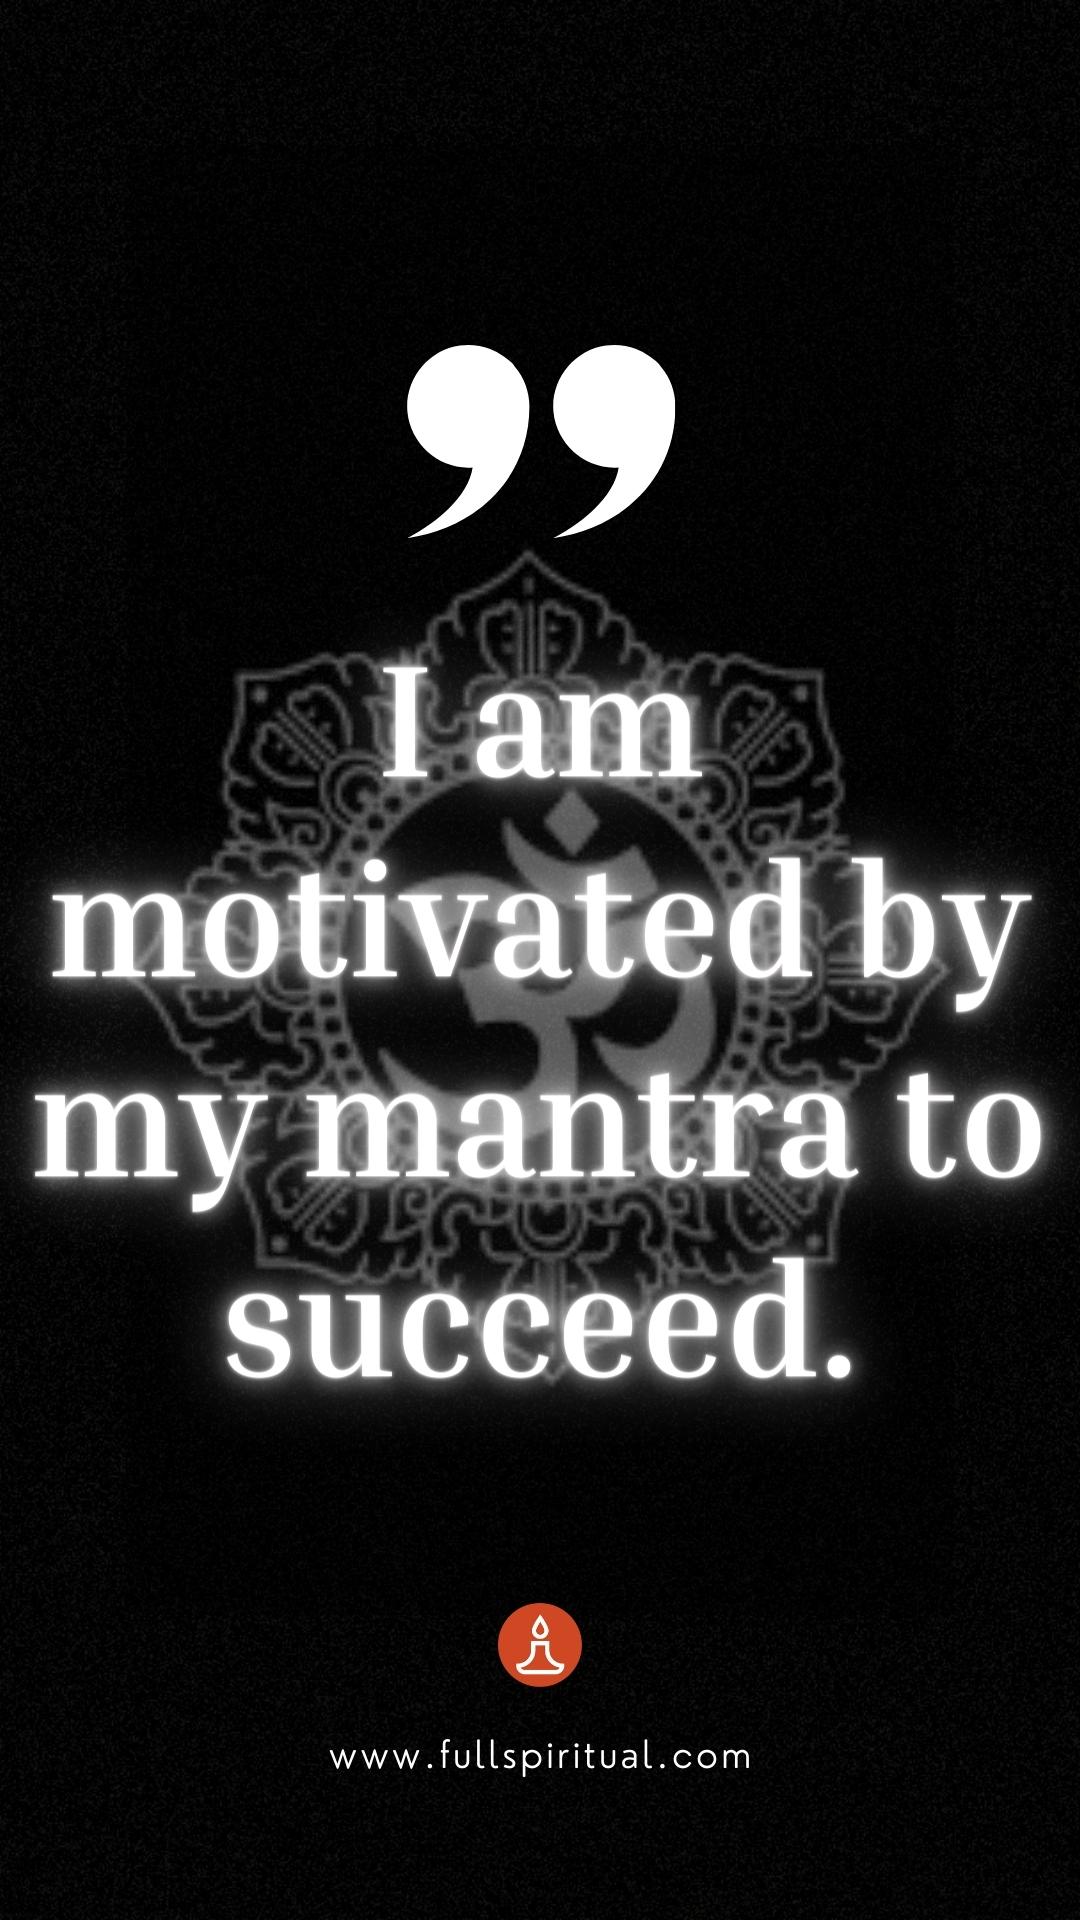 mantra to succeed